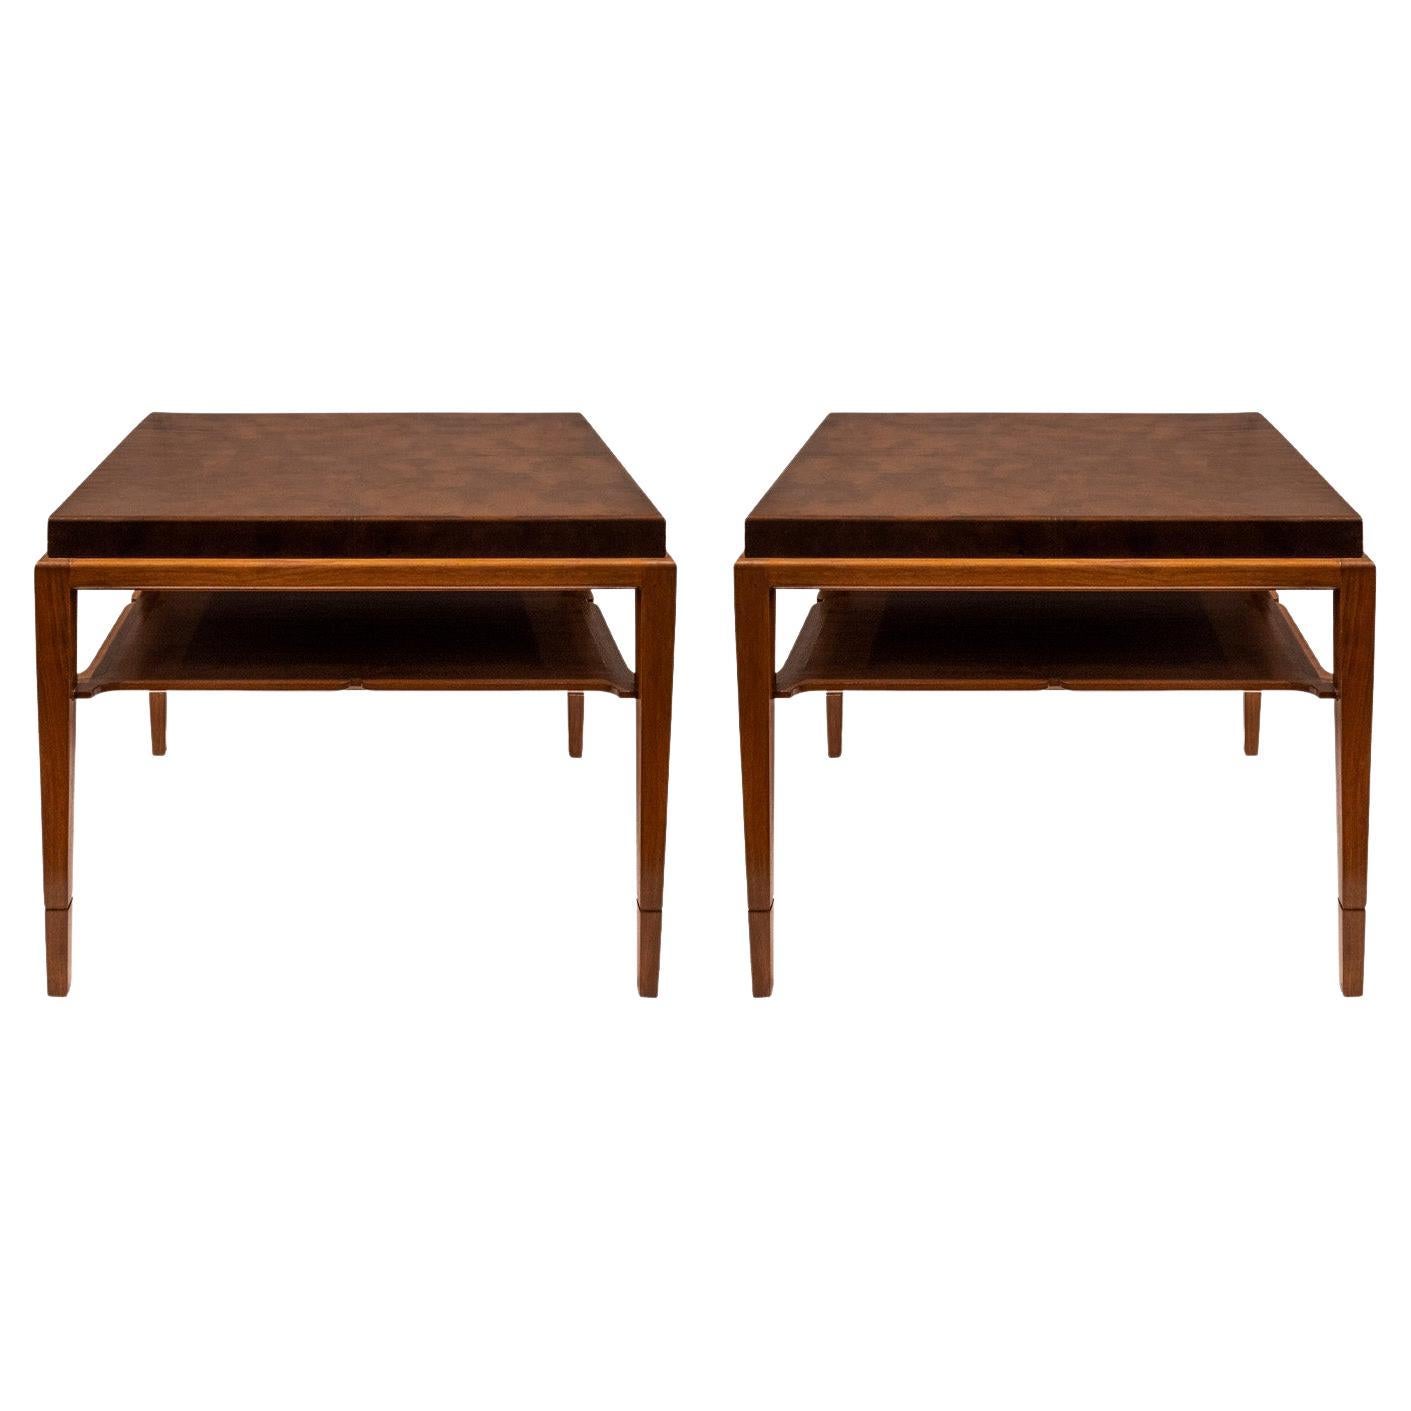 Tommi Parzinger Finely Crafted Pair of Mahogany Tables with Leather Tops 1940s